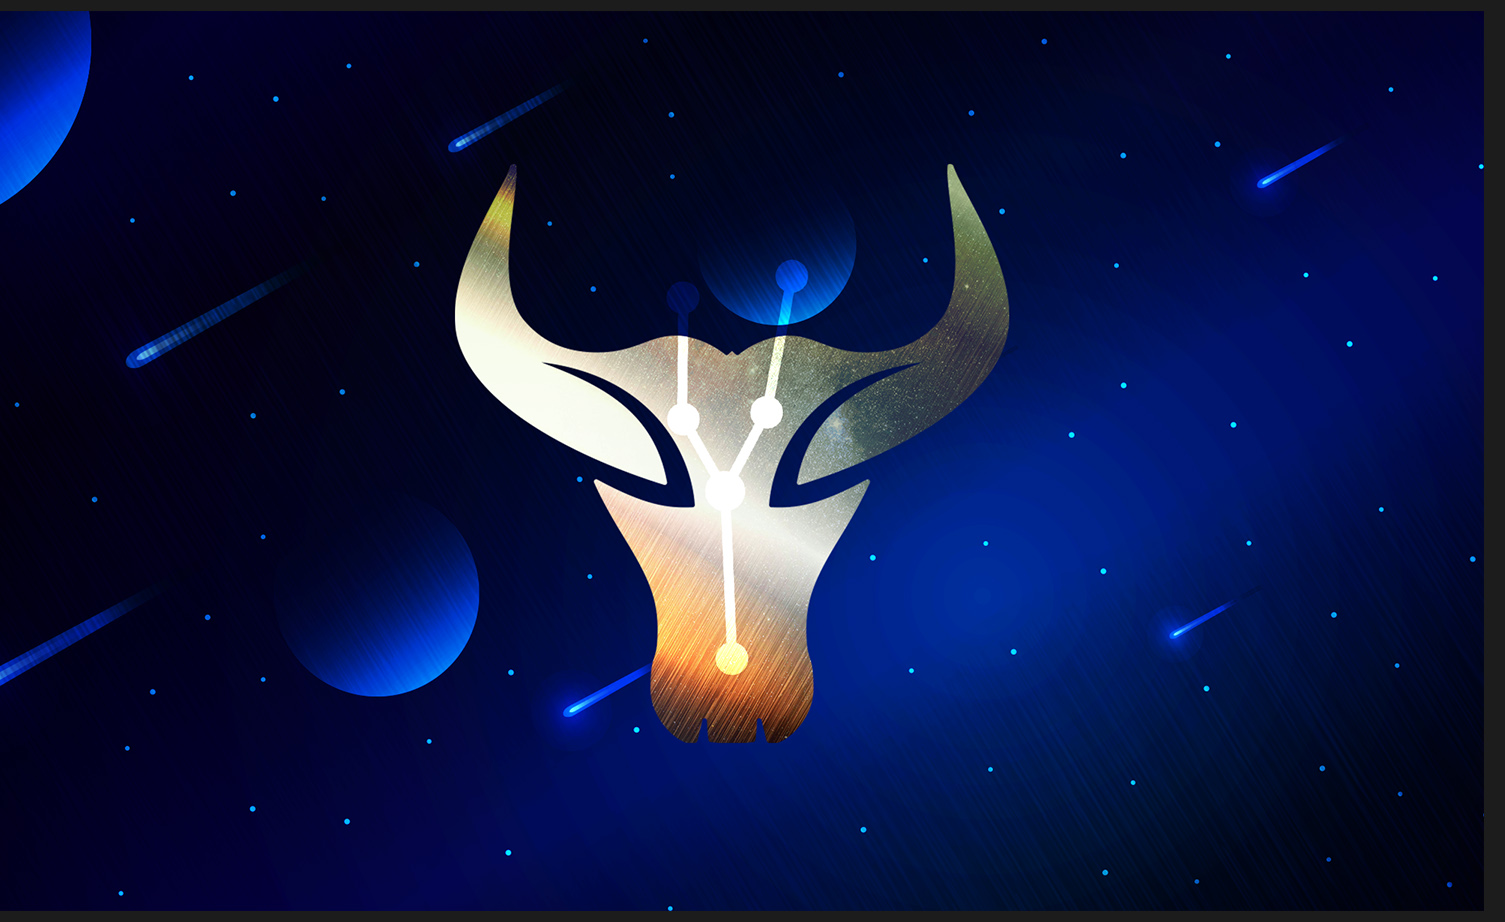 A pictorial representation of Alloy Taurus with a bull's head against the Taurus constellation in a night sky.